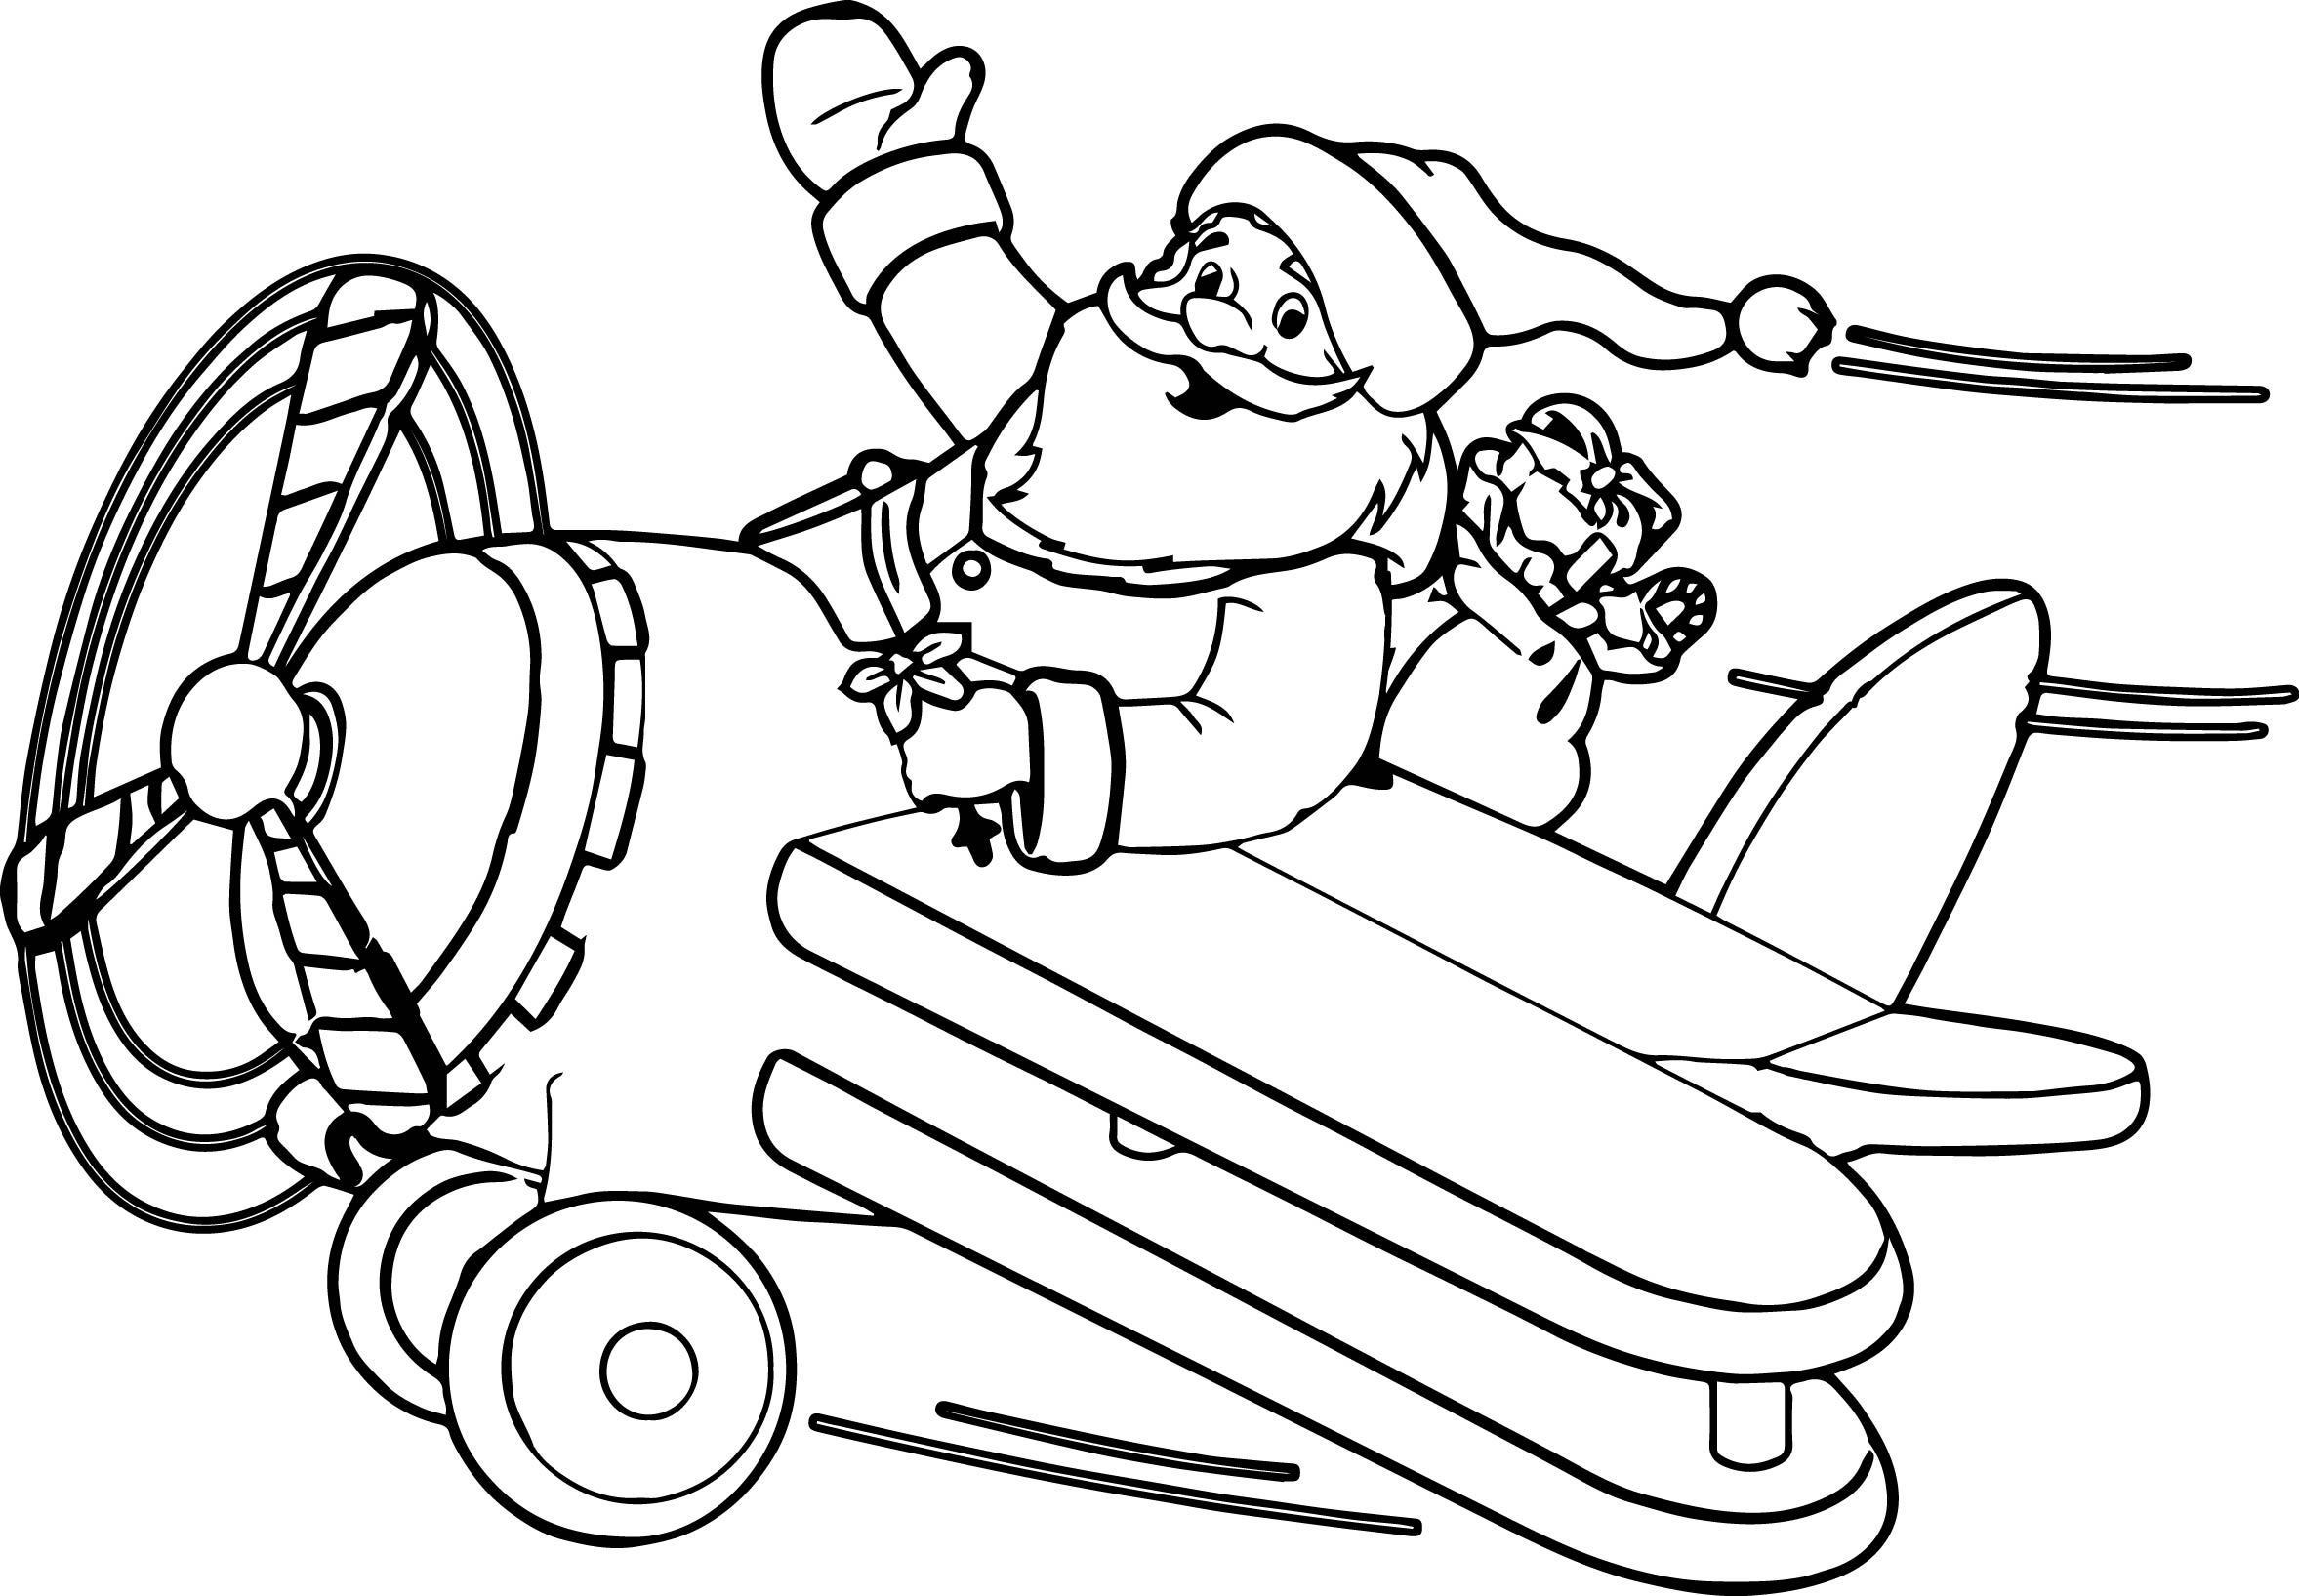 Cartoon Airplane Coloring Pages at GetColorings.com | Free printable